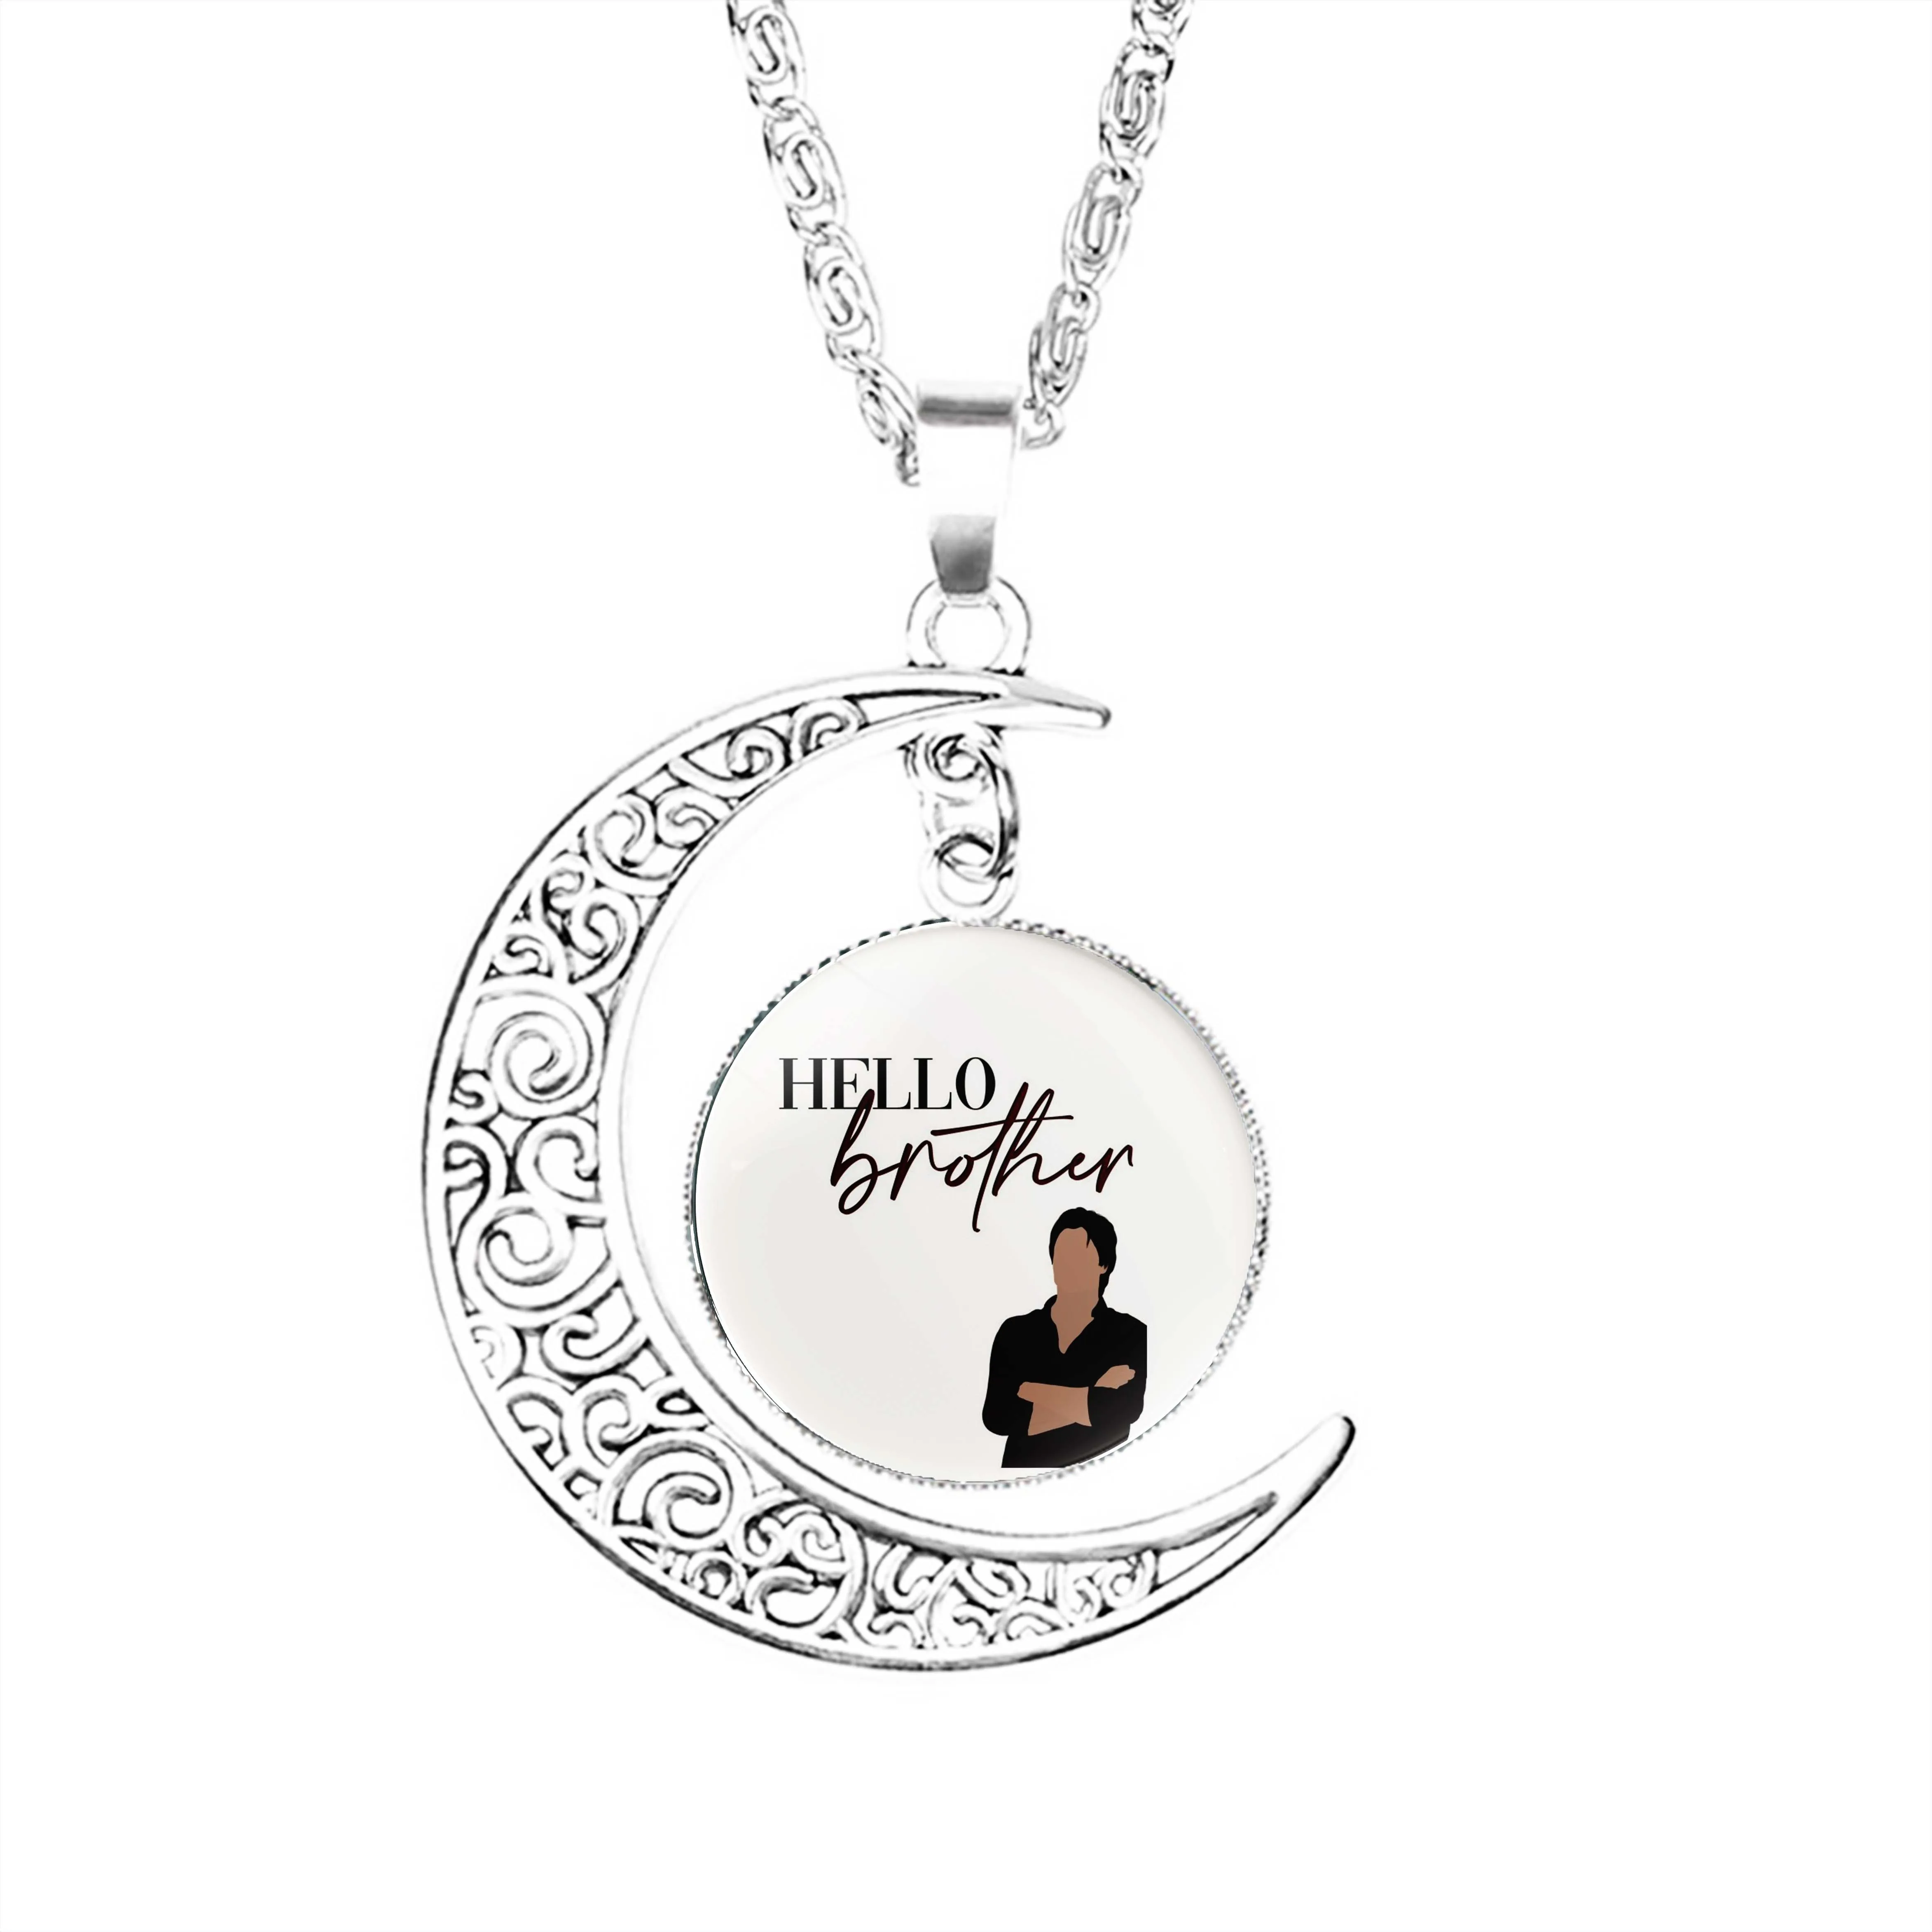 Hello Brother Damon Salvatore Vampire Diaries  Moon Necklace Crescent Lady Accessories Party Jewelry Dome Chain Charm Glass